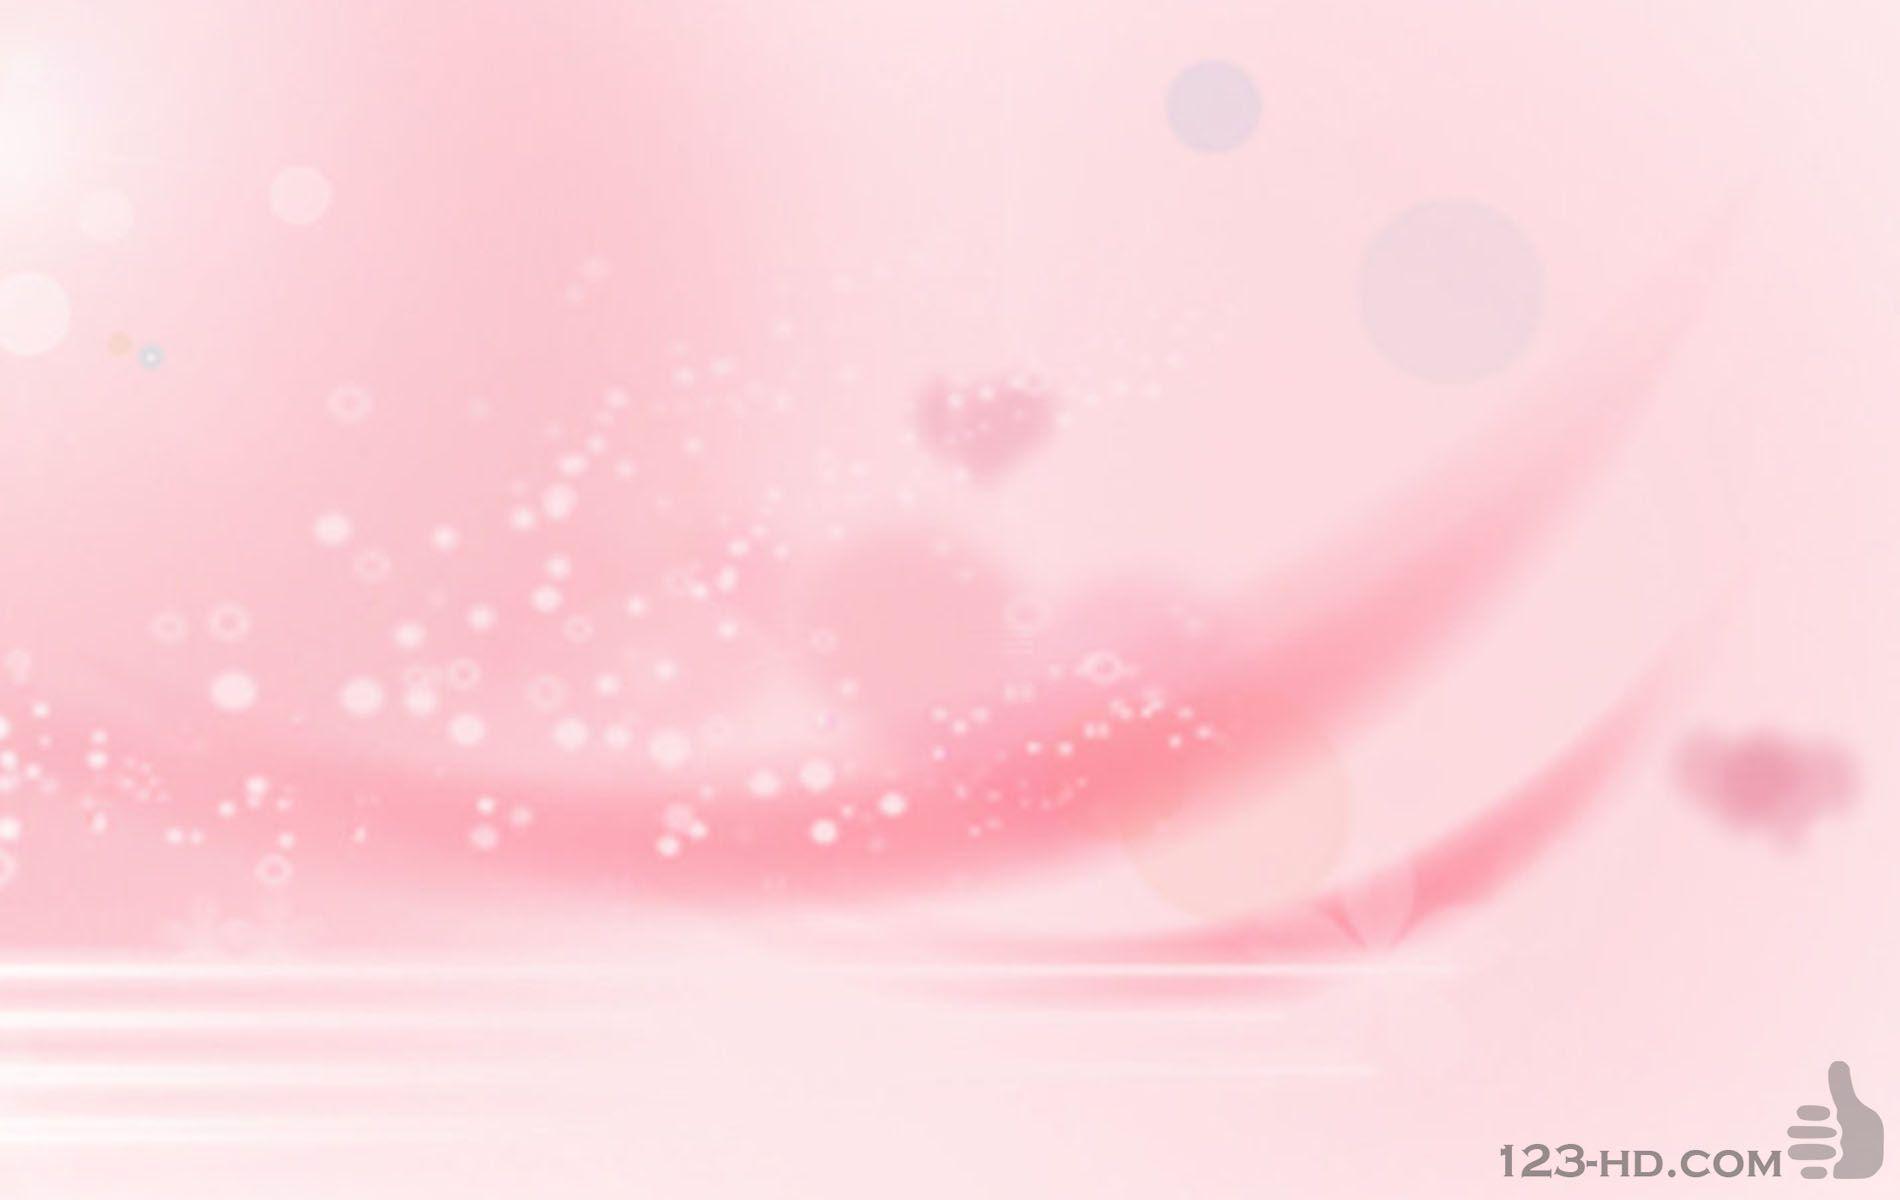 Light Pink Blurry Doted Backgrounds. light pink blurry doted backgrounds. 